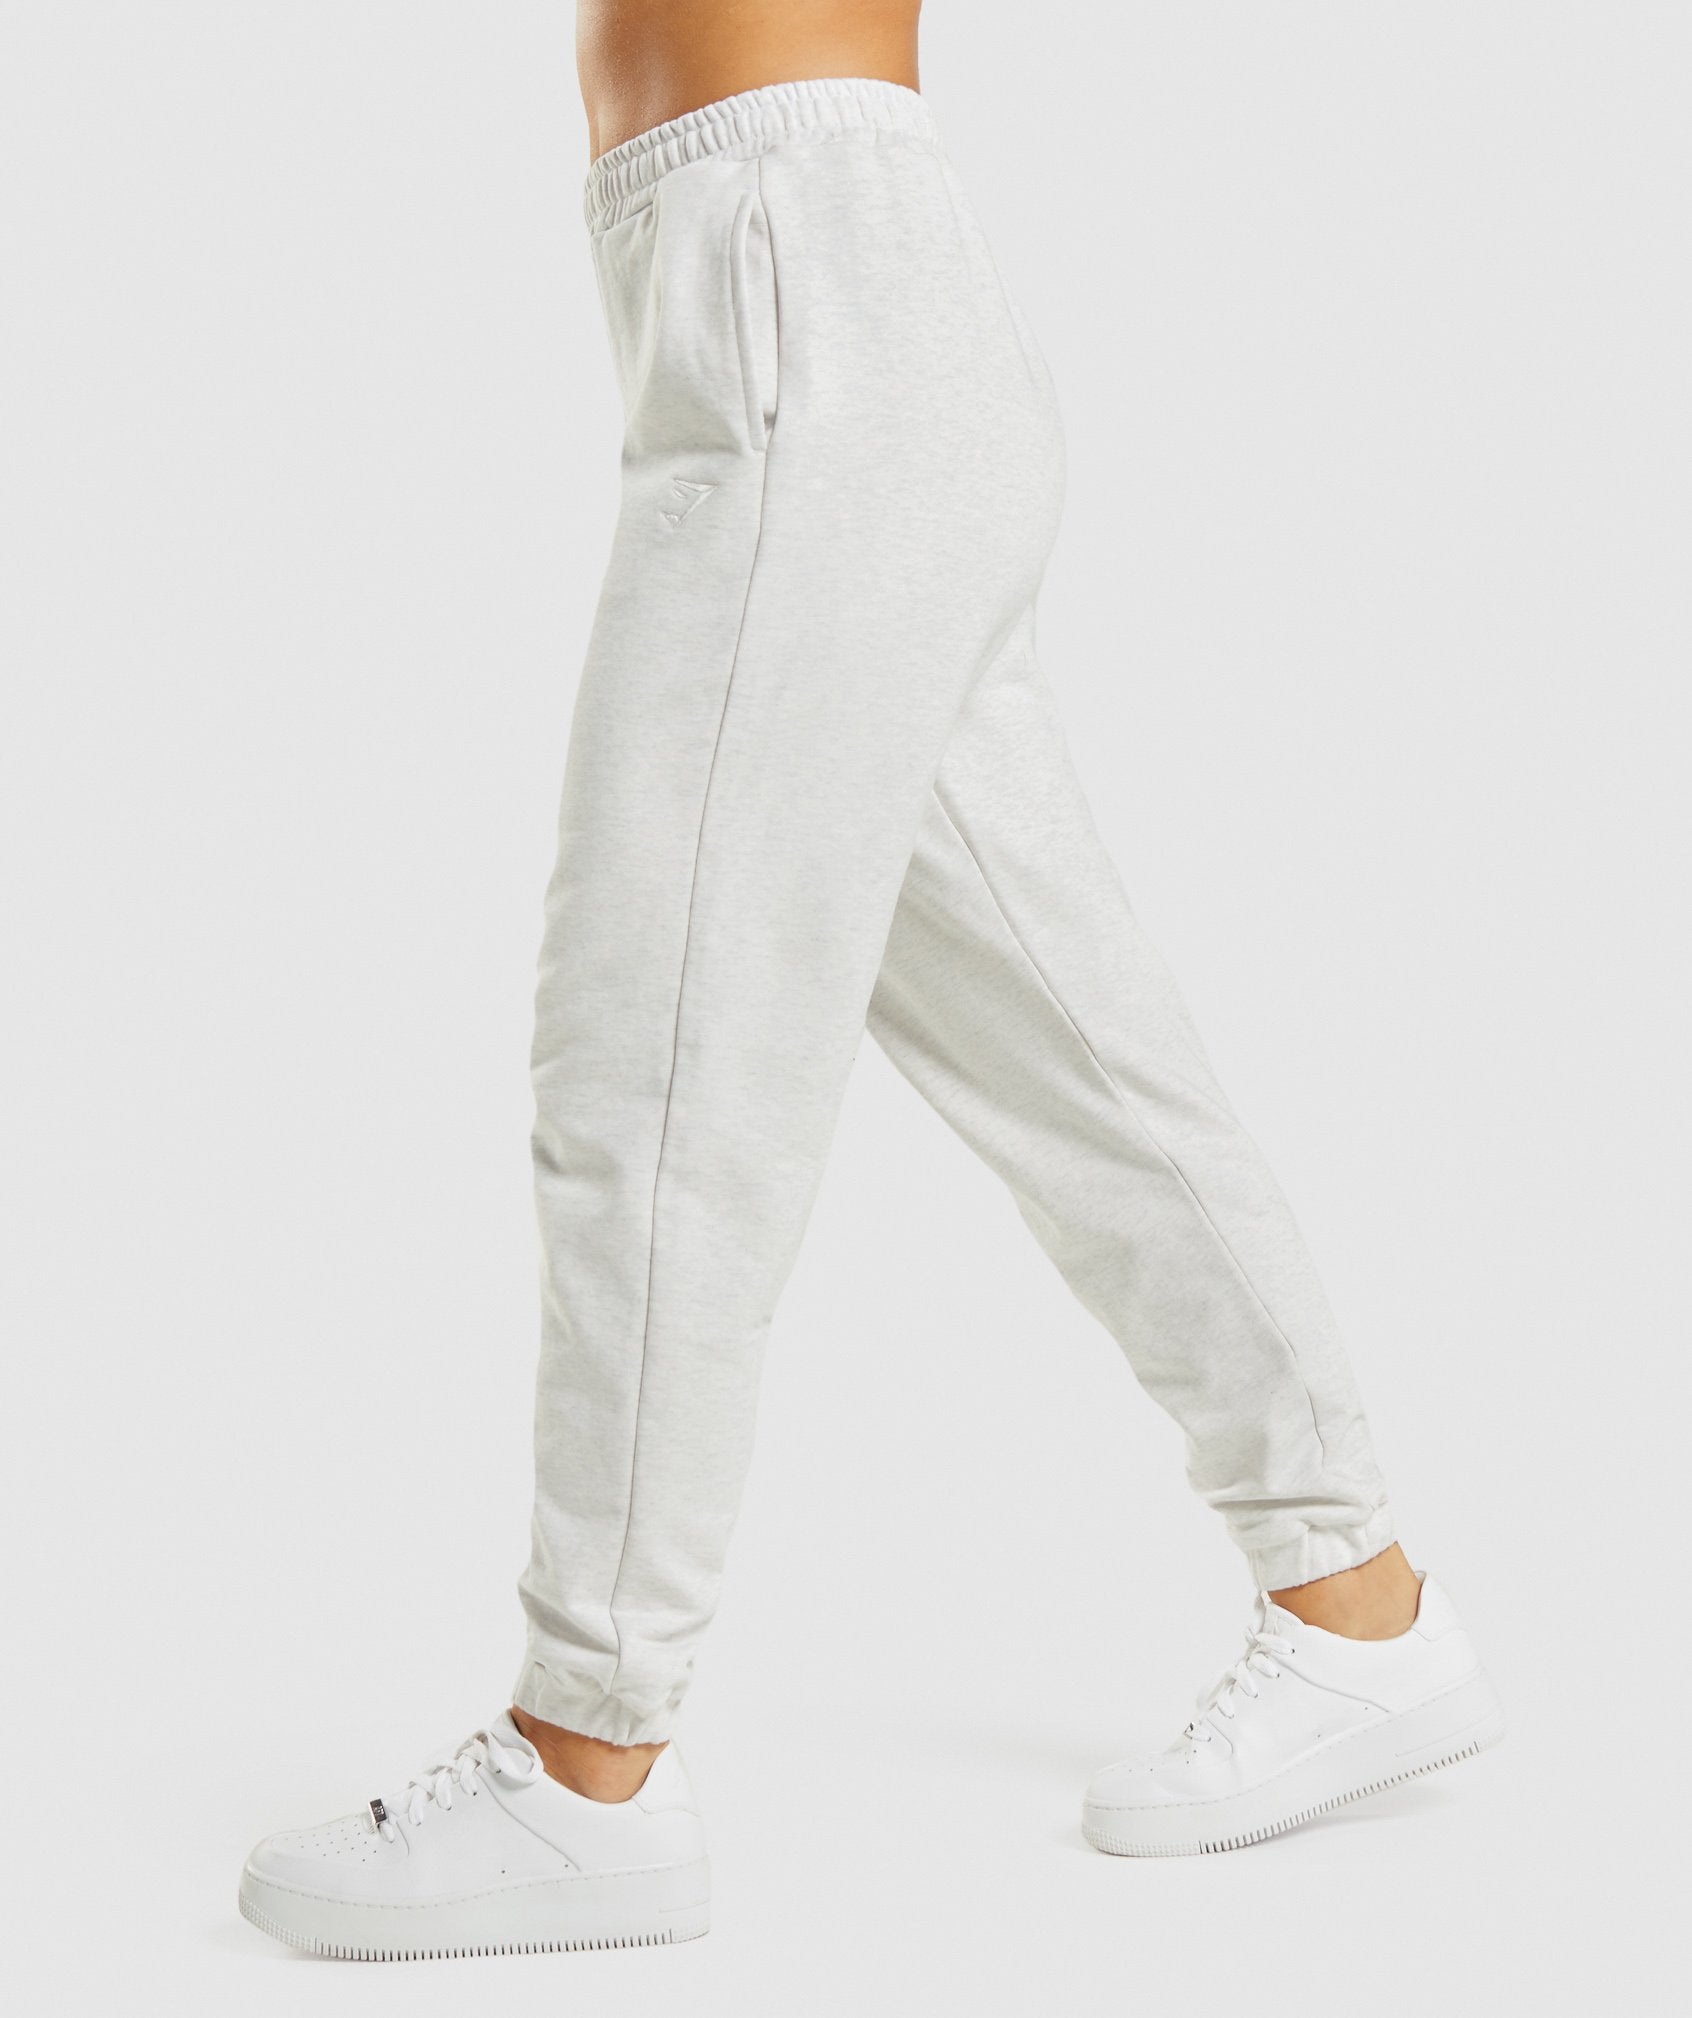 Rest Day Sweats Joggers in White Marl